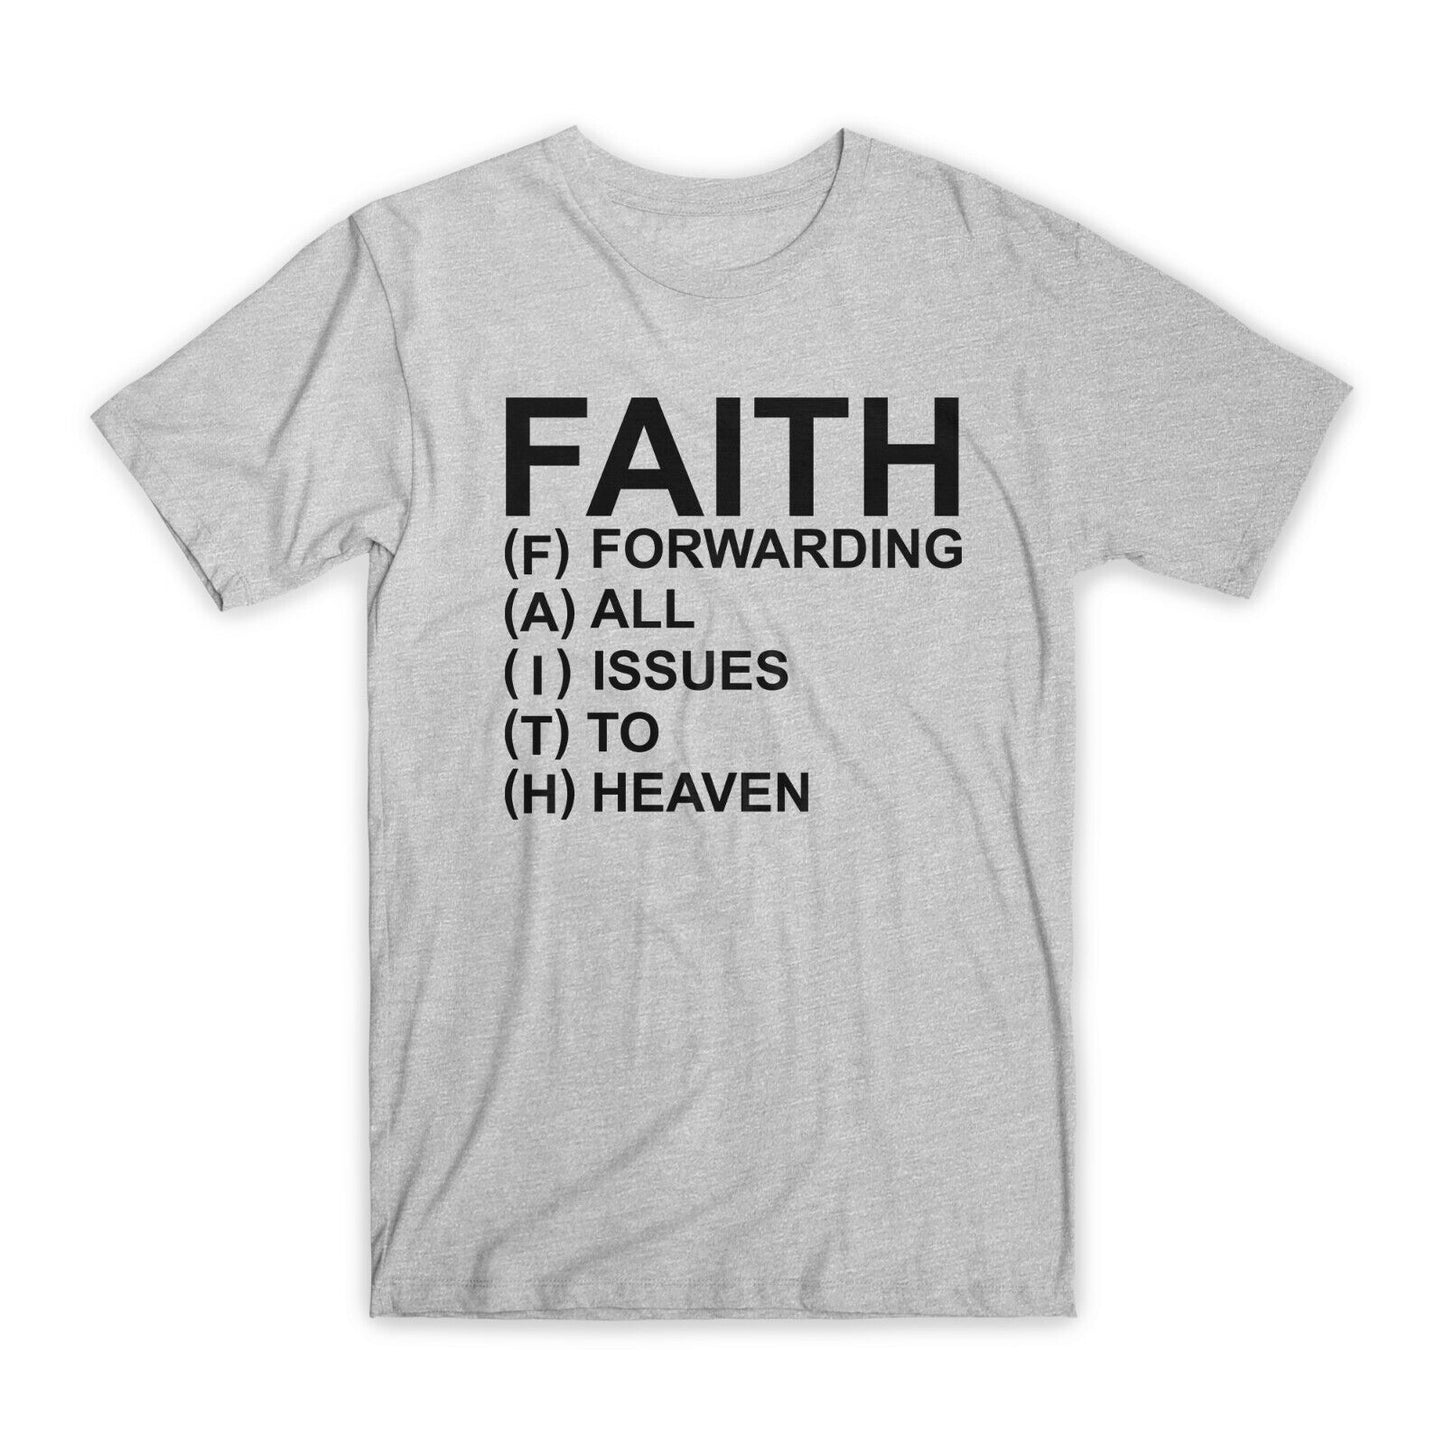 Faith Forwarding All Issues To Heaven T-Shirt Premium Cotton Funny Tees Gift NEW